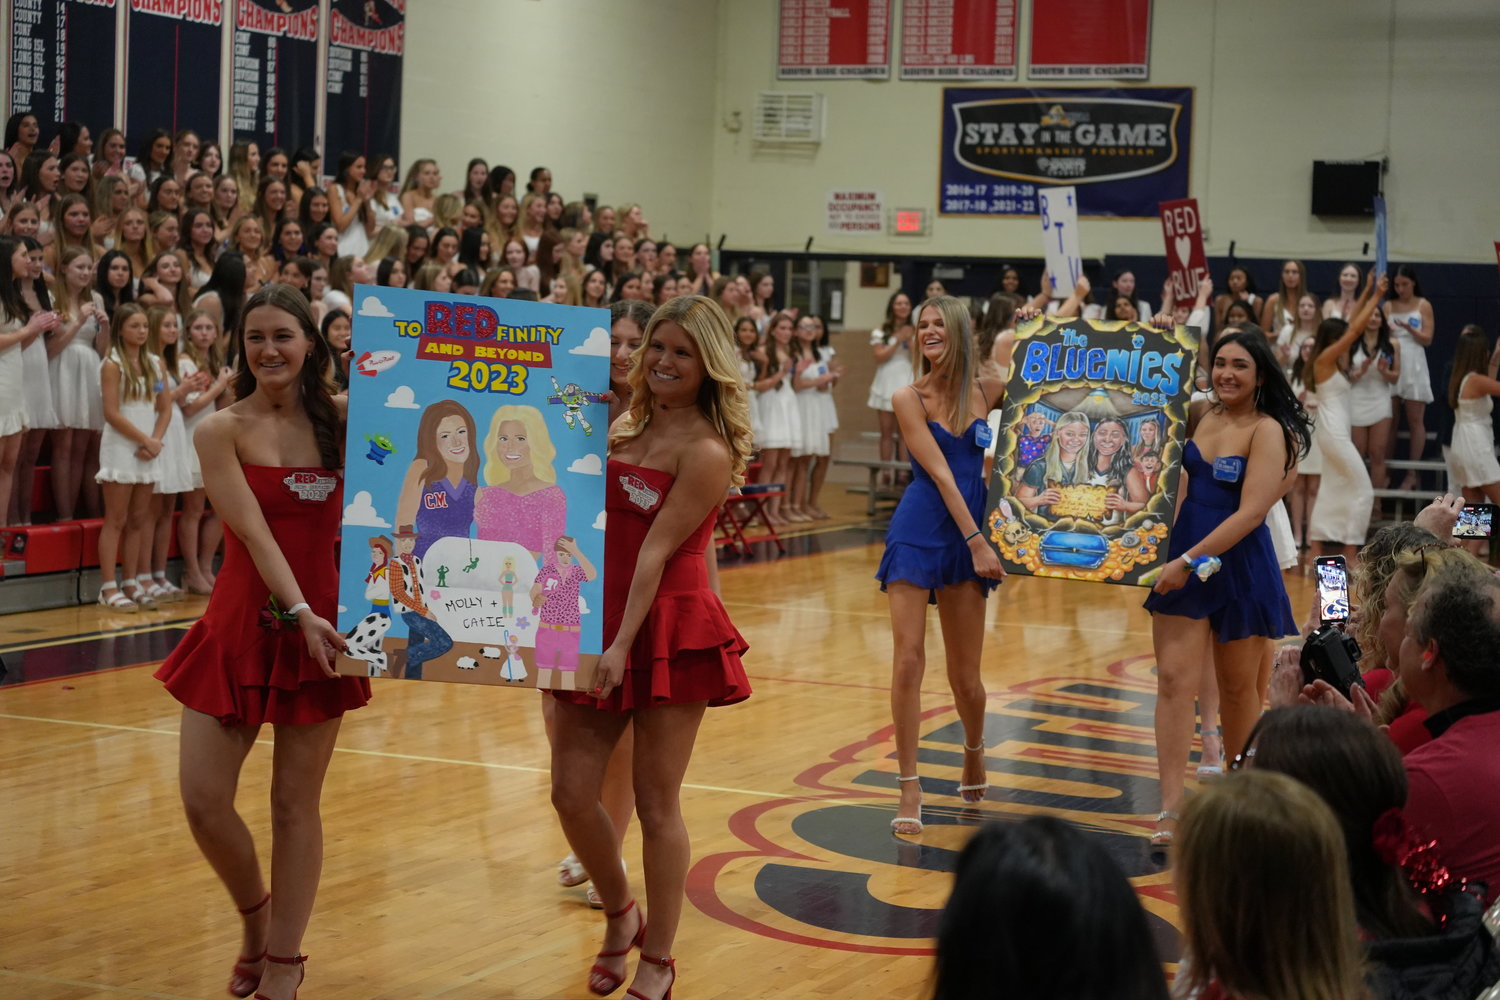 Red team captains Catie Morgan and Molly Munro and Blue team captains Maggie Chifriller and Alayna Marzolini present their themes during the poster and revue night event on Thursday.